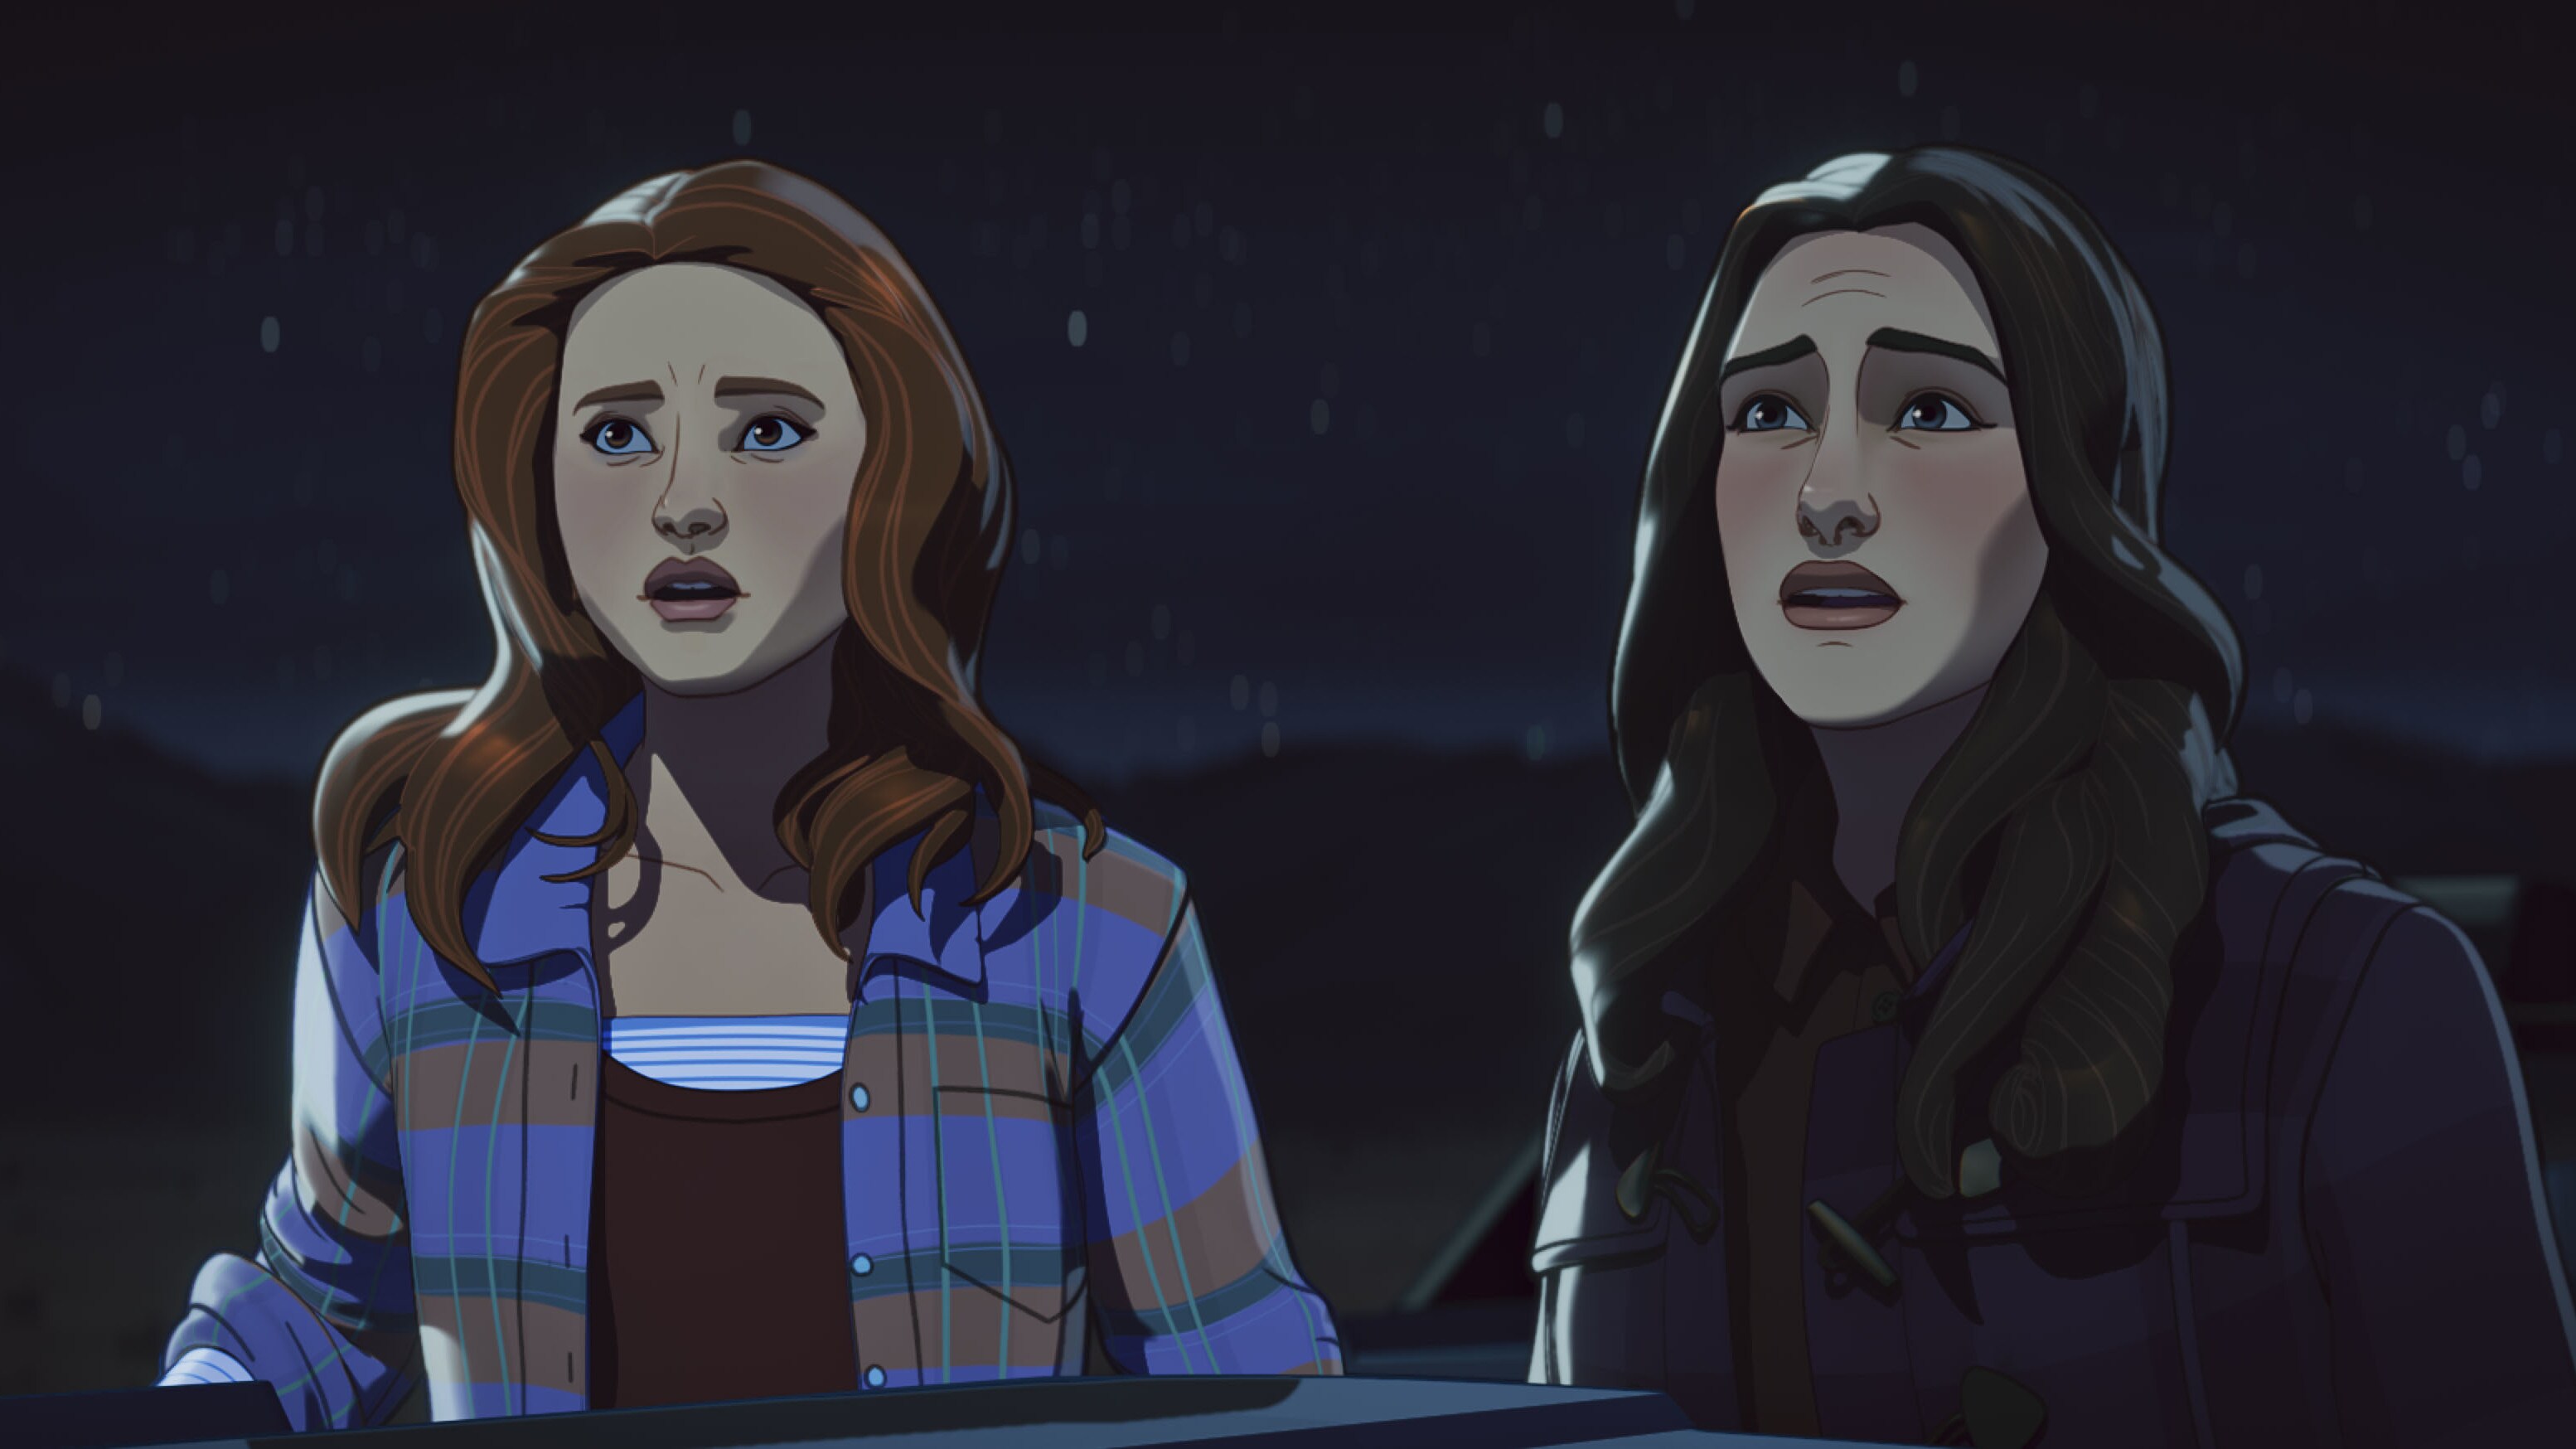 Jane Foster and Darcy in Marvel Studios' WHAT IF…? exclusively on Disney+. ©Marvel Studios 2021. All Rights Reserved.